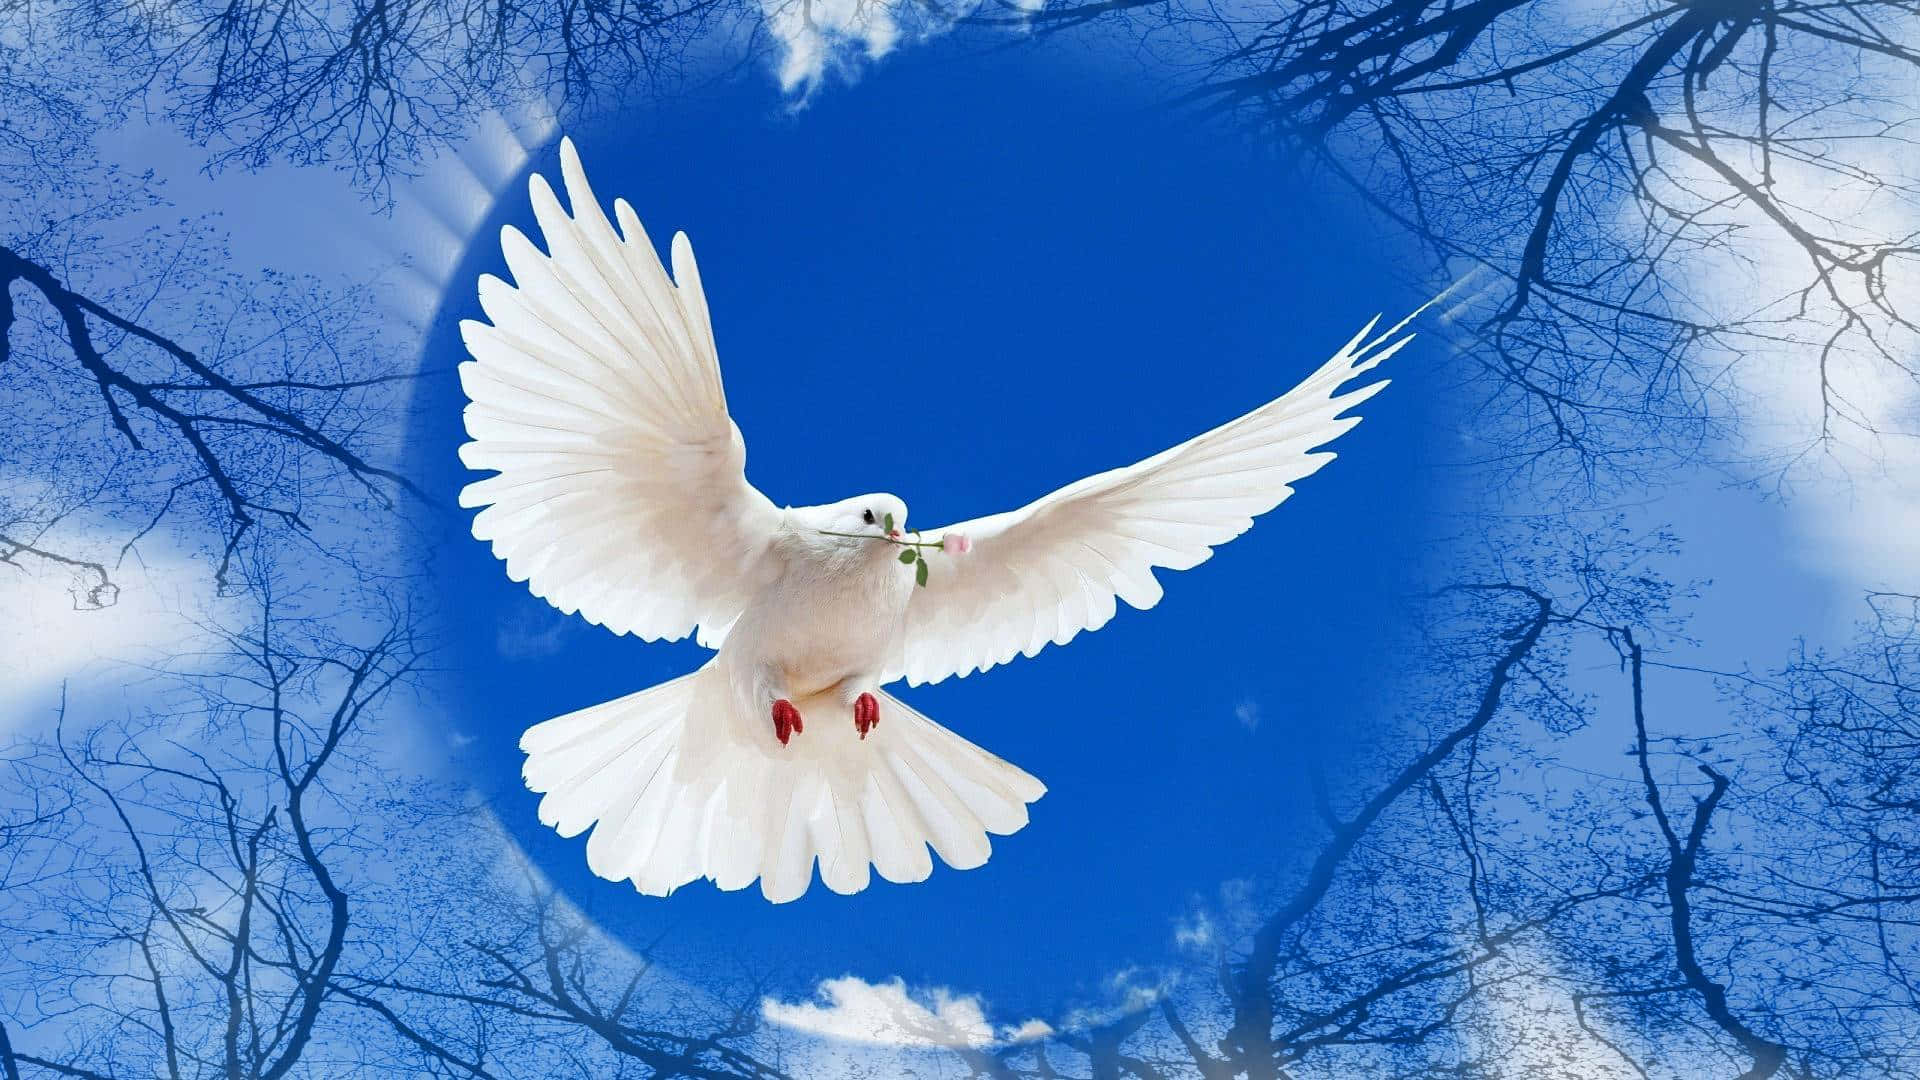 A White Dove Flying Through The Sky With Trees